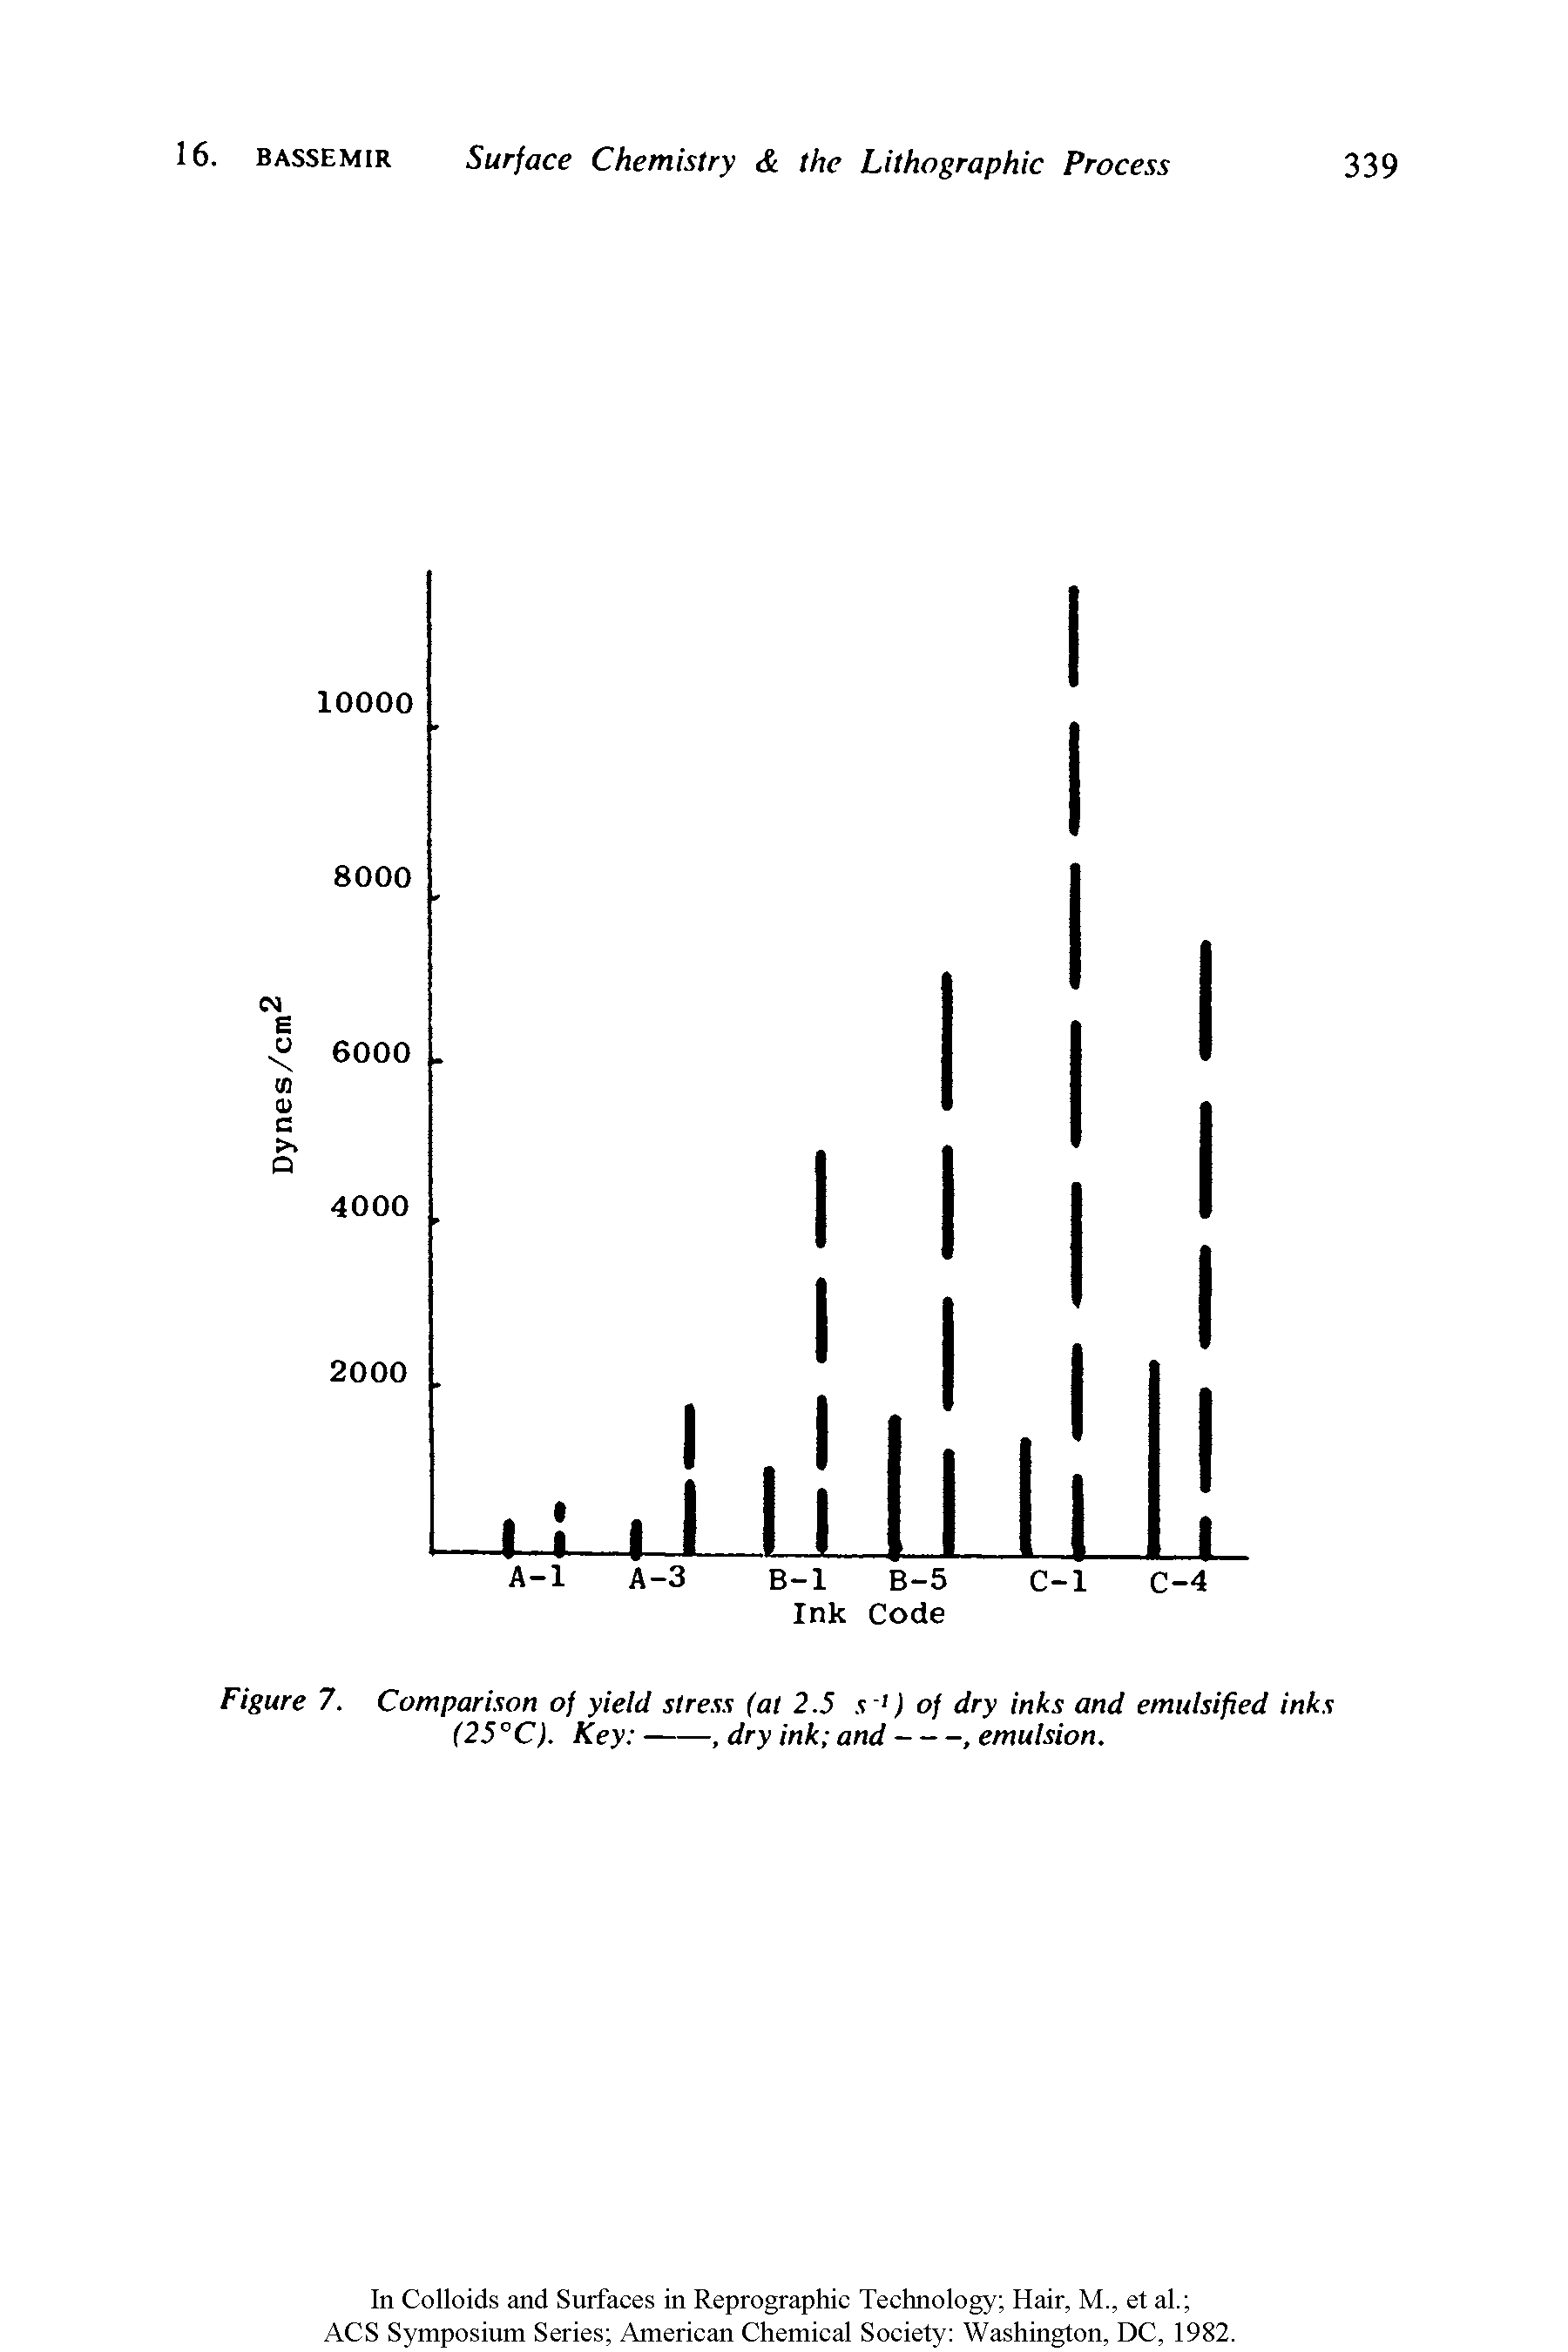 Figure 7. Comparison of yield stress (at 2.5 s ) of dry inks and emulsified inks (25°C). Key -------------------, dry ink and--, emulsion.